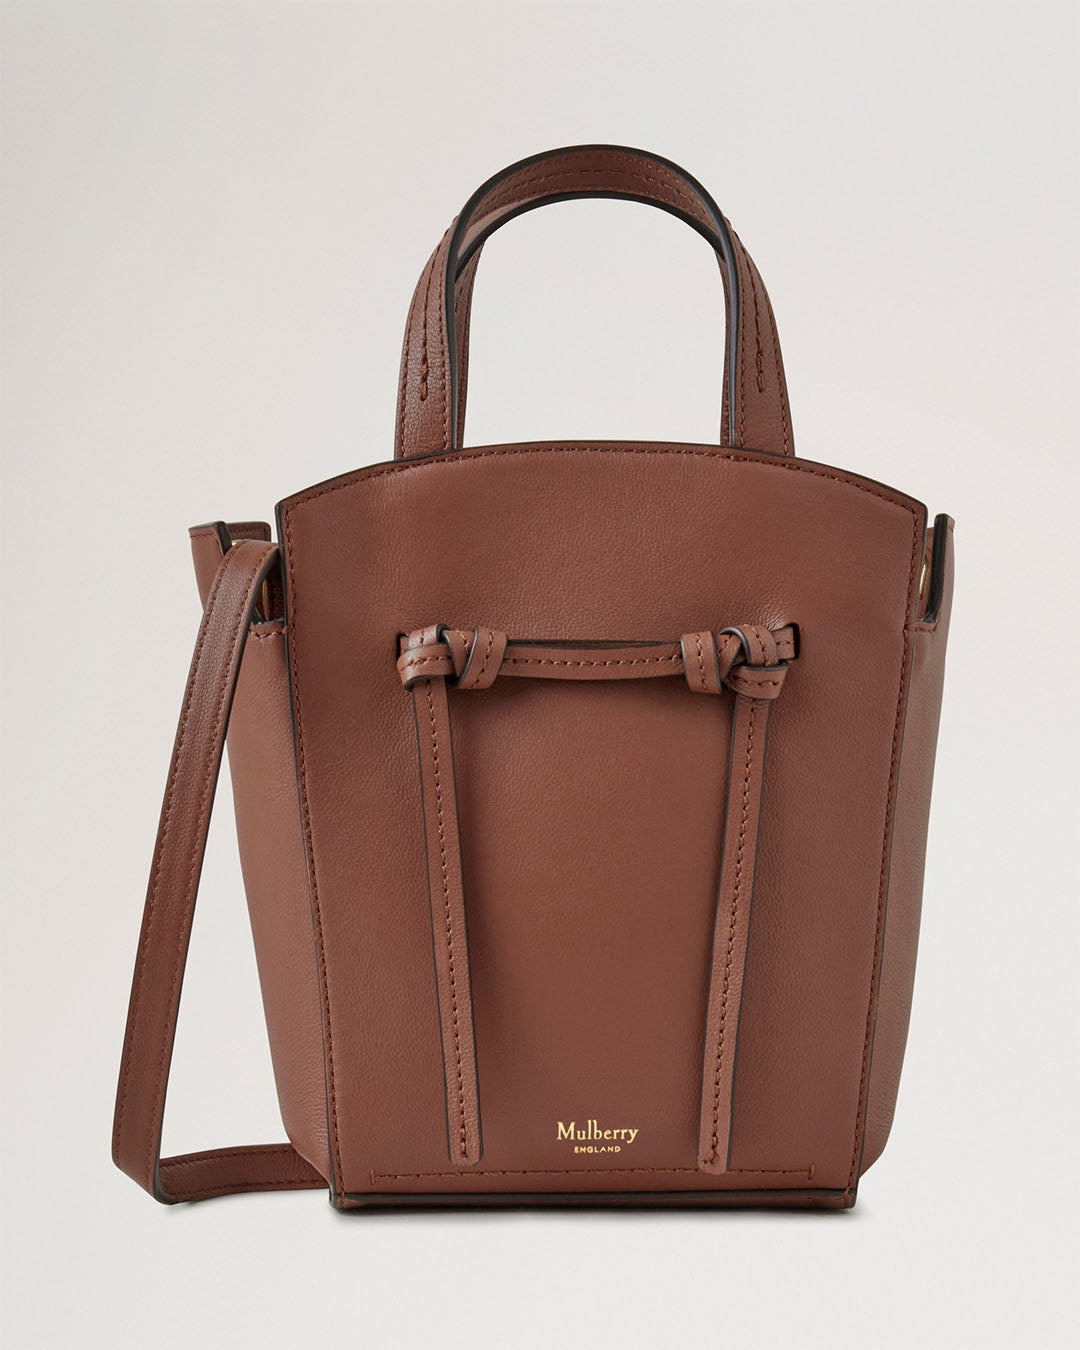 Mulberry Mini Clovelly Tote